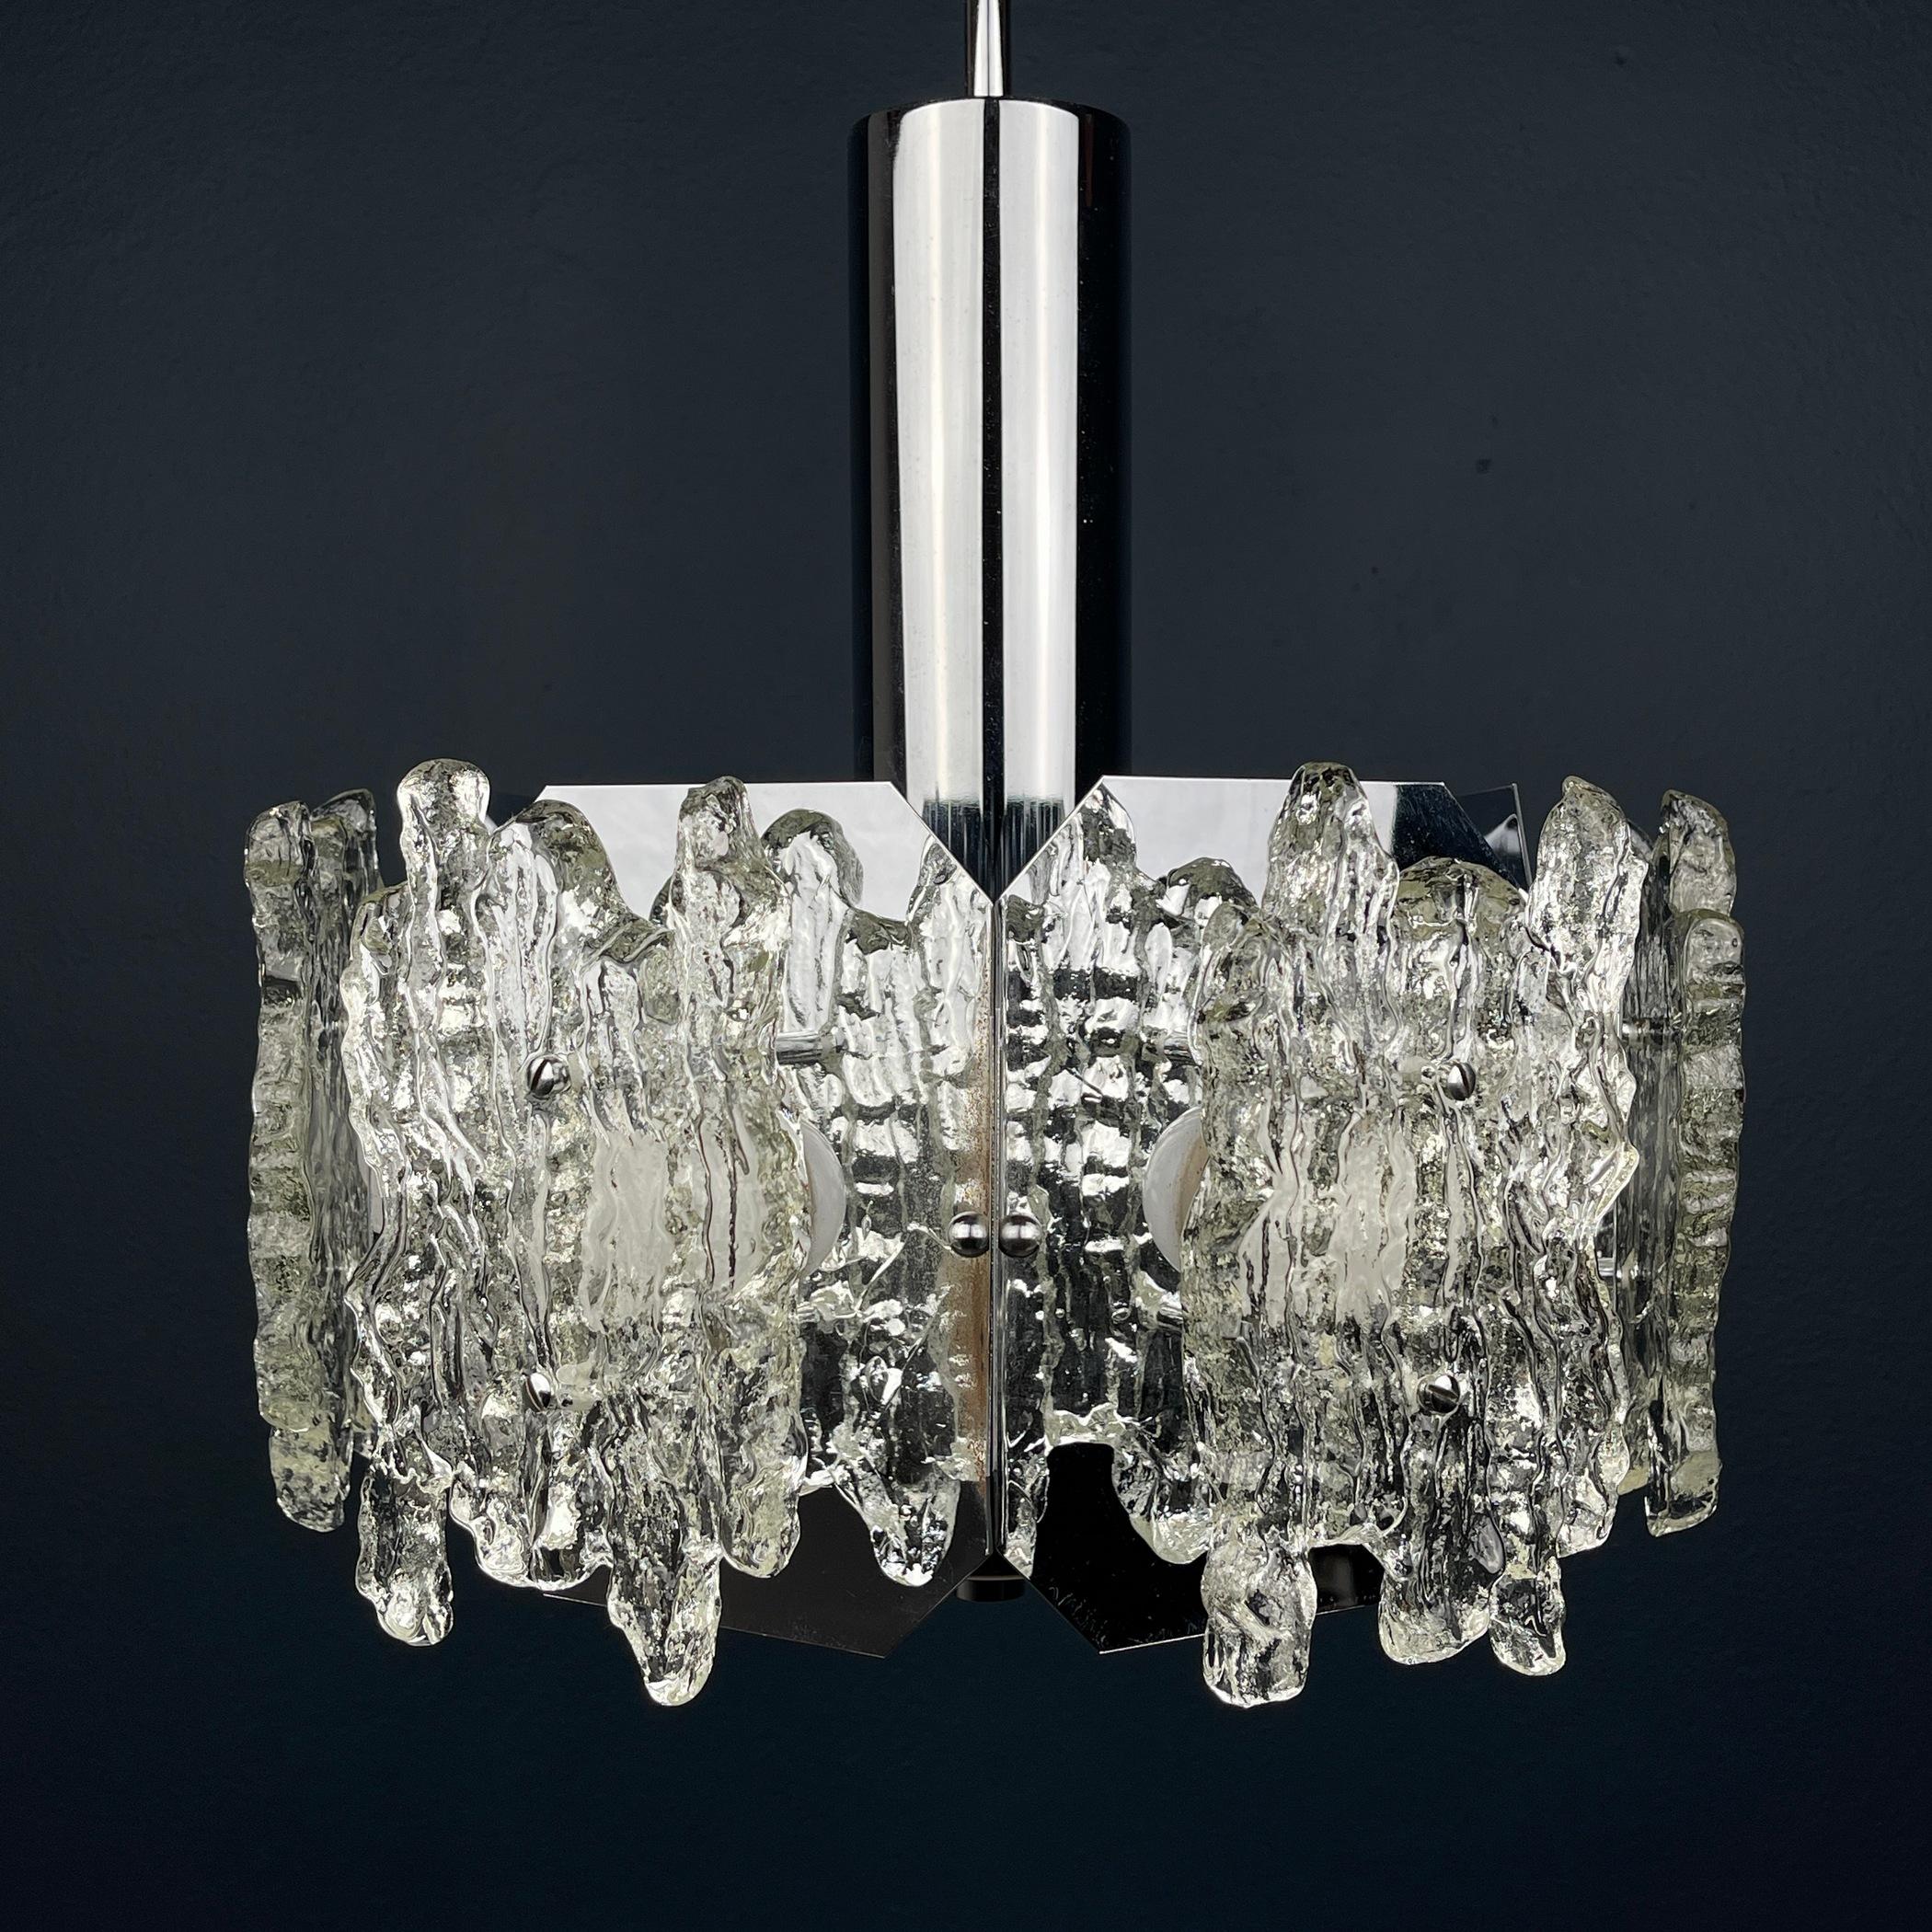 This vintage ice Murano glass chandelier is a mid-century masterpiece made in Italy in the 1970s. Crafted from blown-thick Murano glass, it showcases exceptional craftsmanship and design. The chandelier boasts a striking and elegant presence that